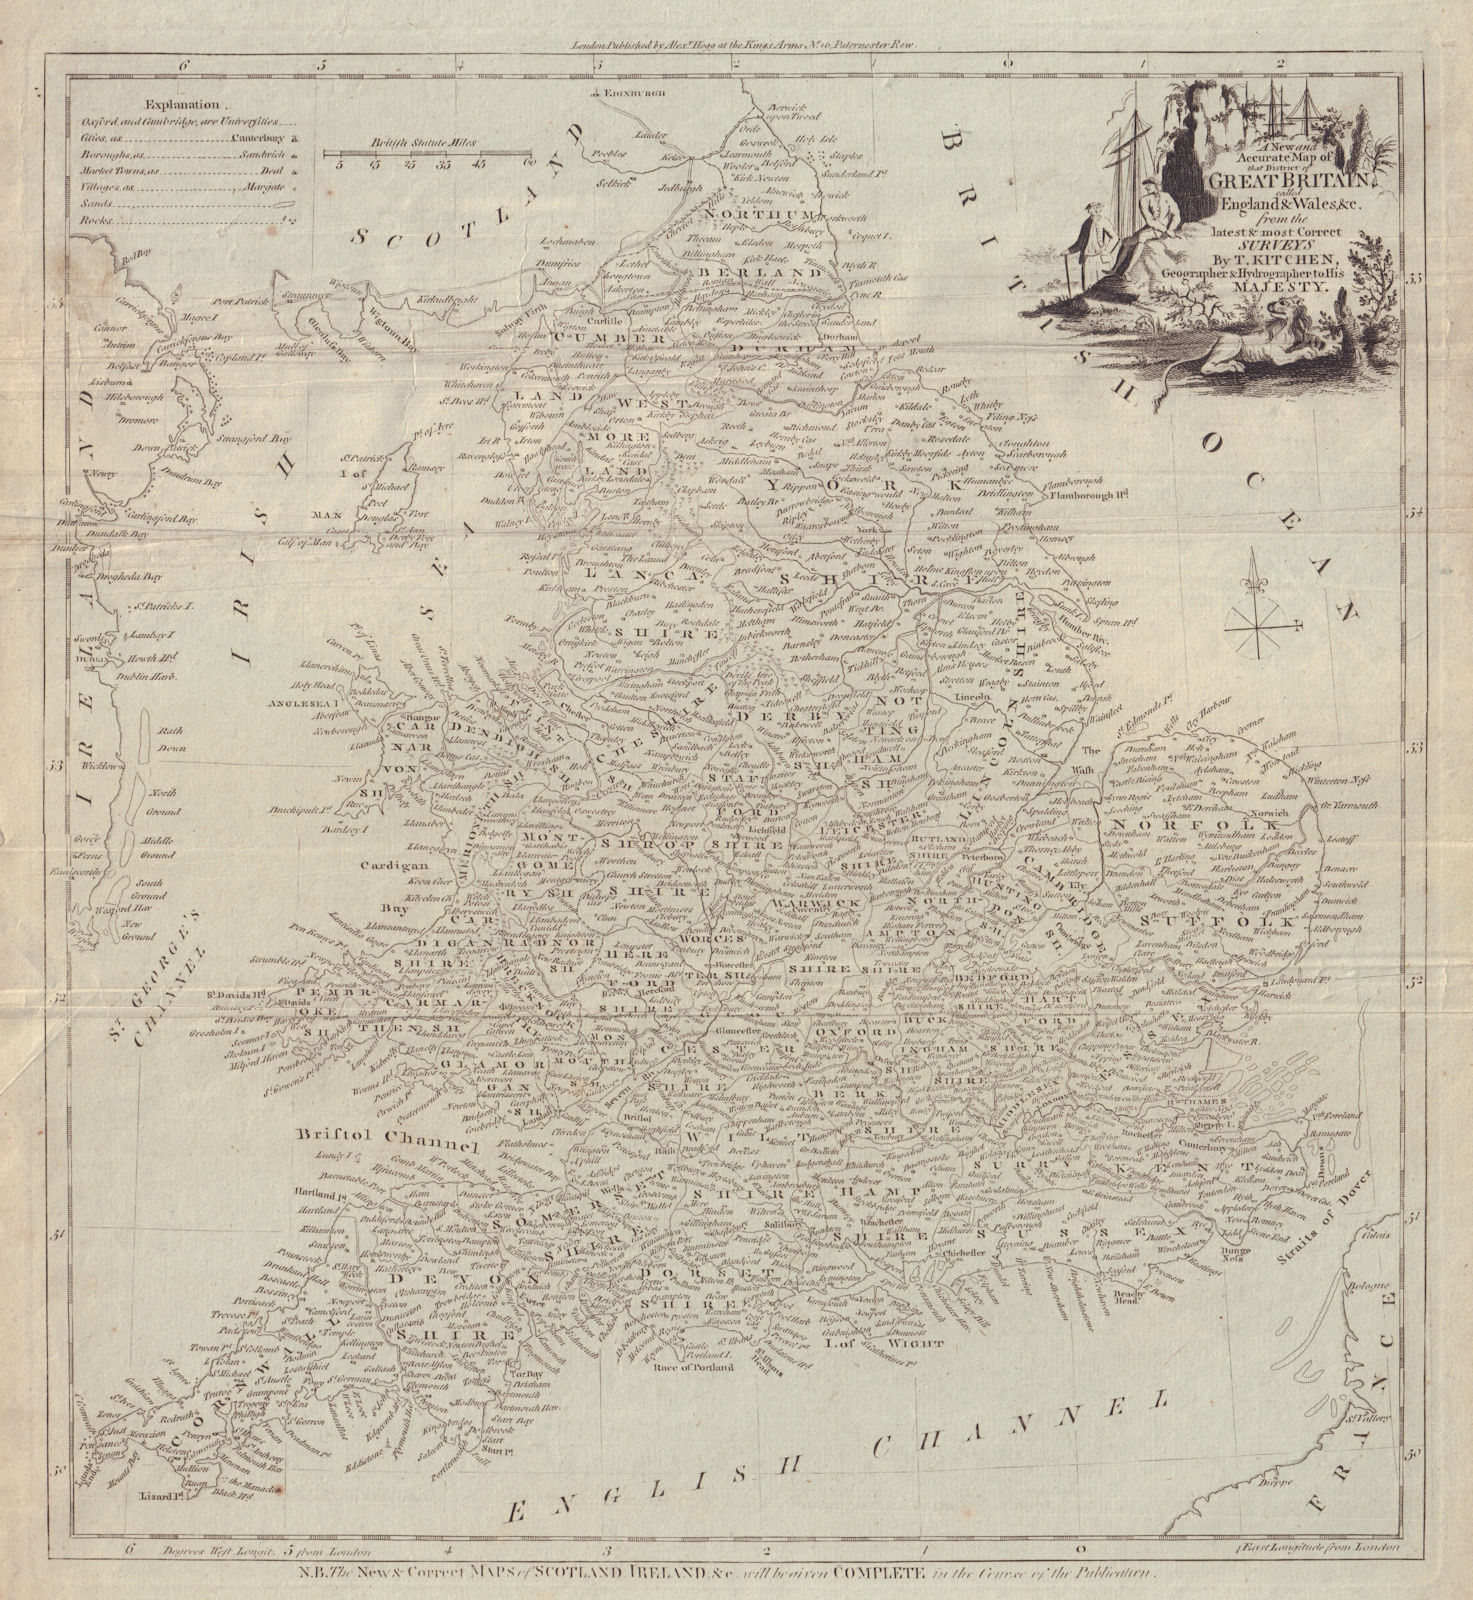 Associate Product Map of that District of Great Britain called England & Wales. KITCHIN c1795